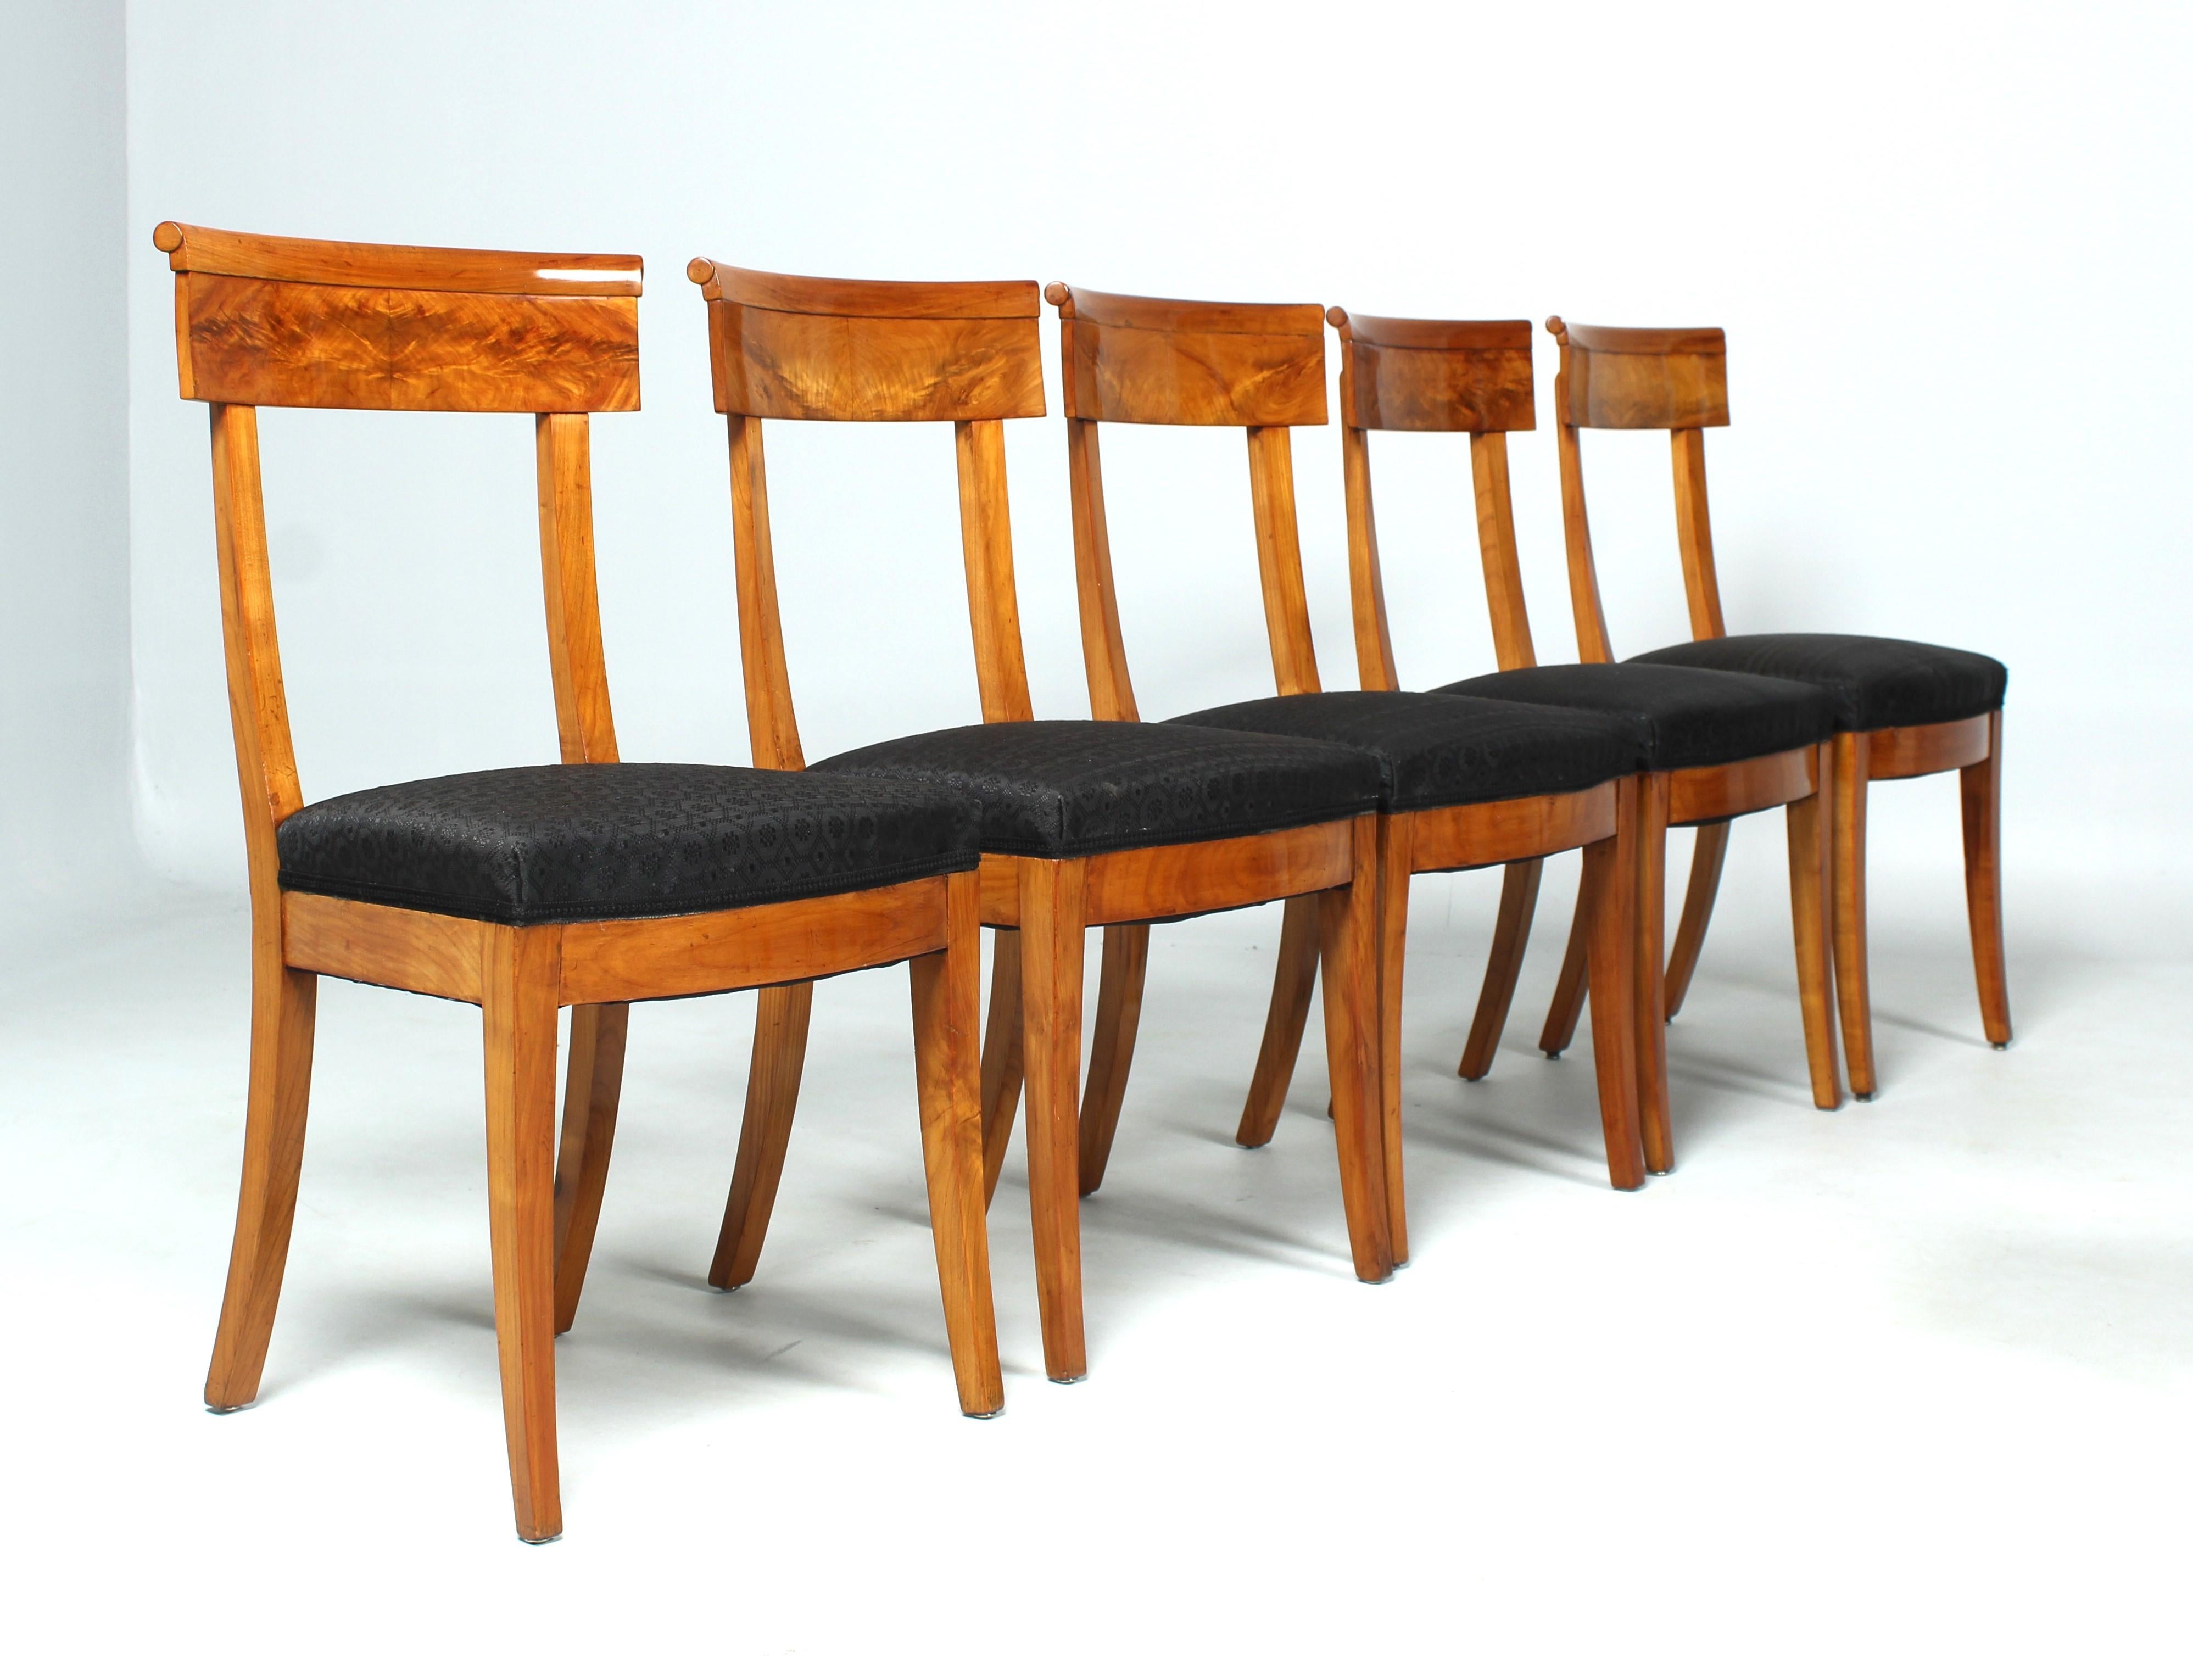 Early 19th Century Biedermeier Chairs, Set of Eight, Cherrywood, Circa 1820 For Sale 6